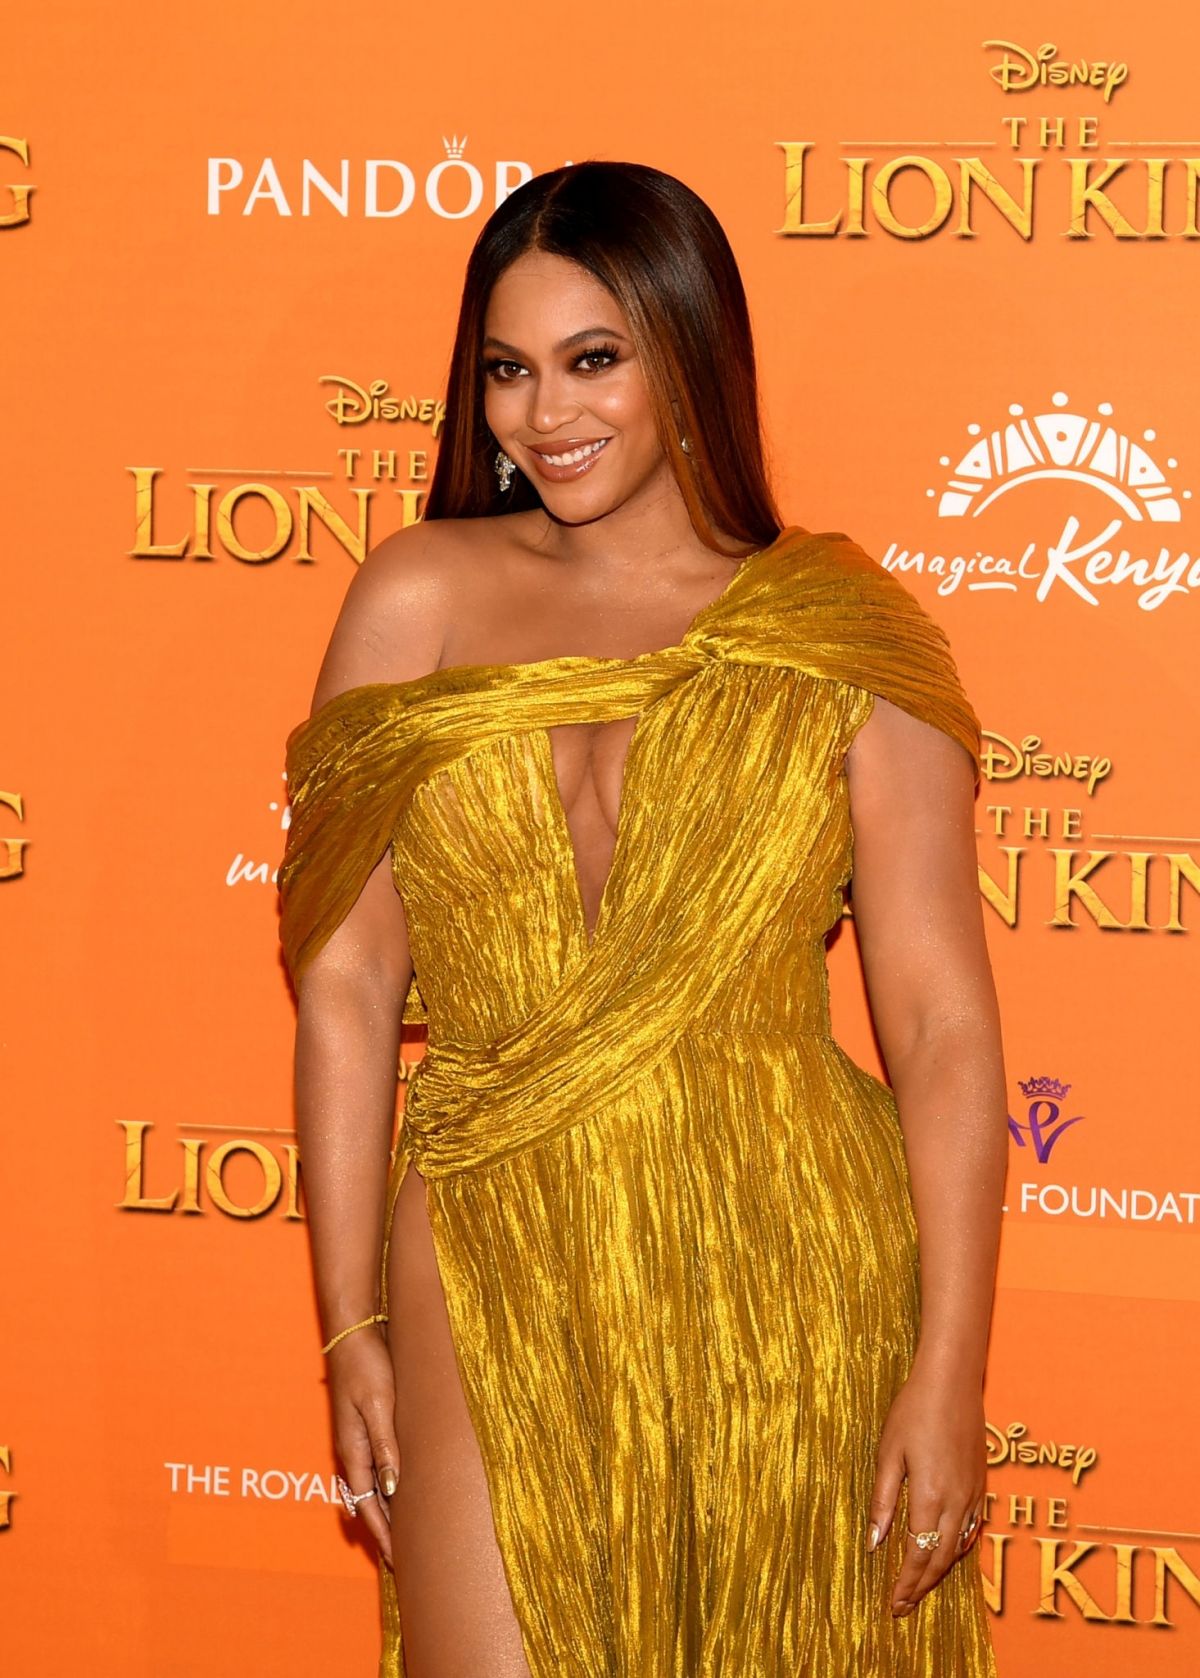 beyonce-at-the-lion-king-premiere-in-london-07-14-2019-2.jpg